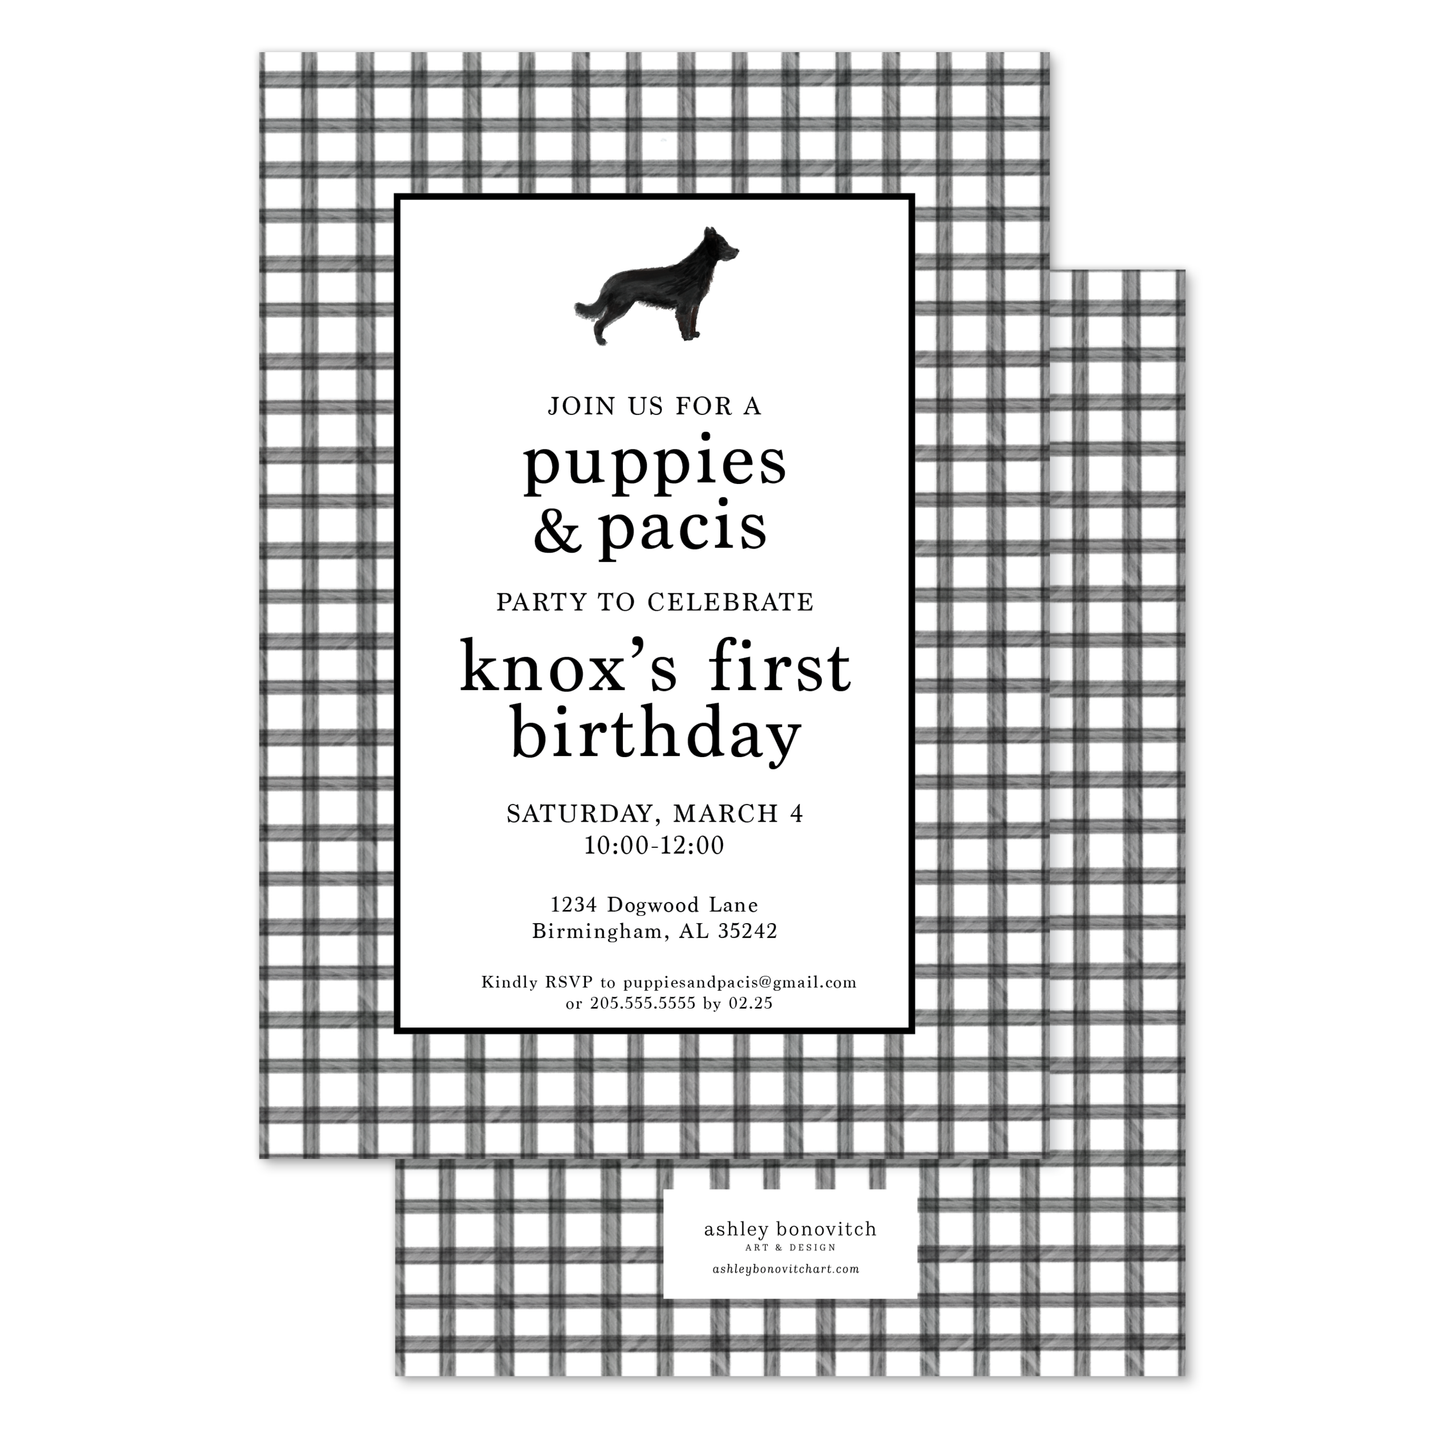 Puppies and Pacis Party Invitation